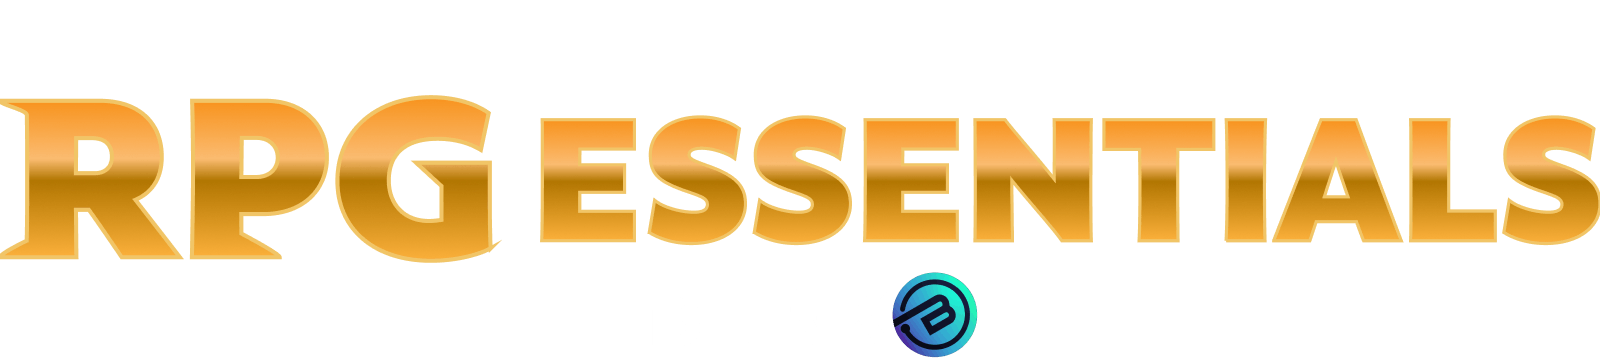 Unity & Unreal RPG Essentials by Blink